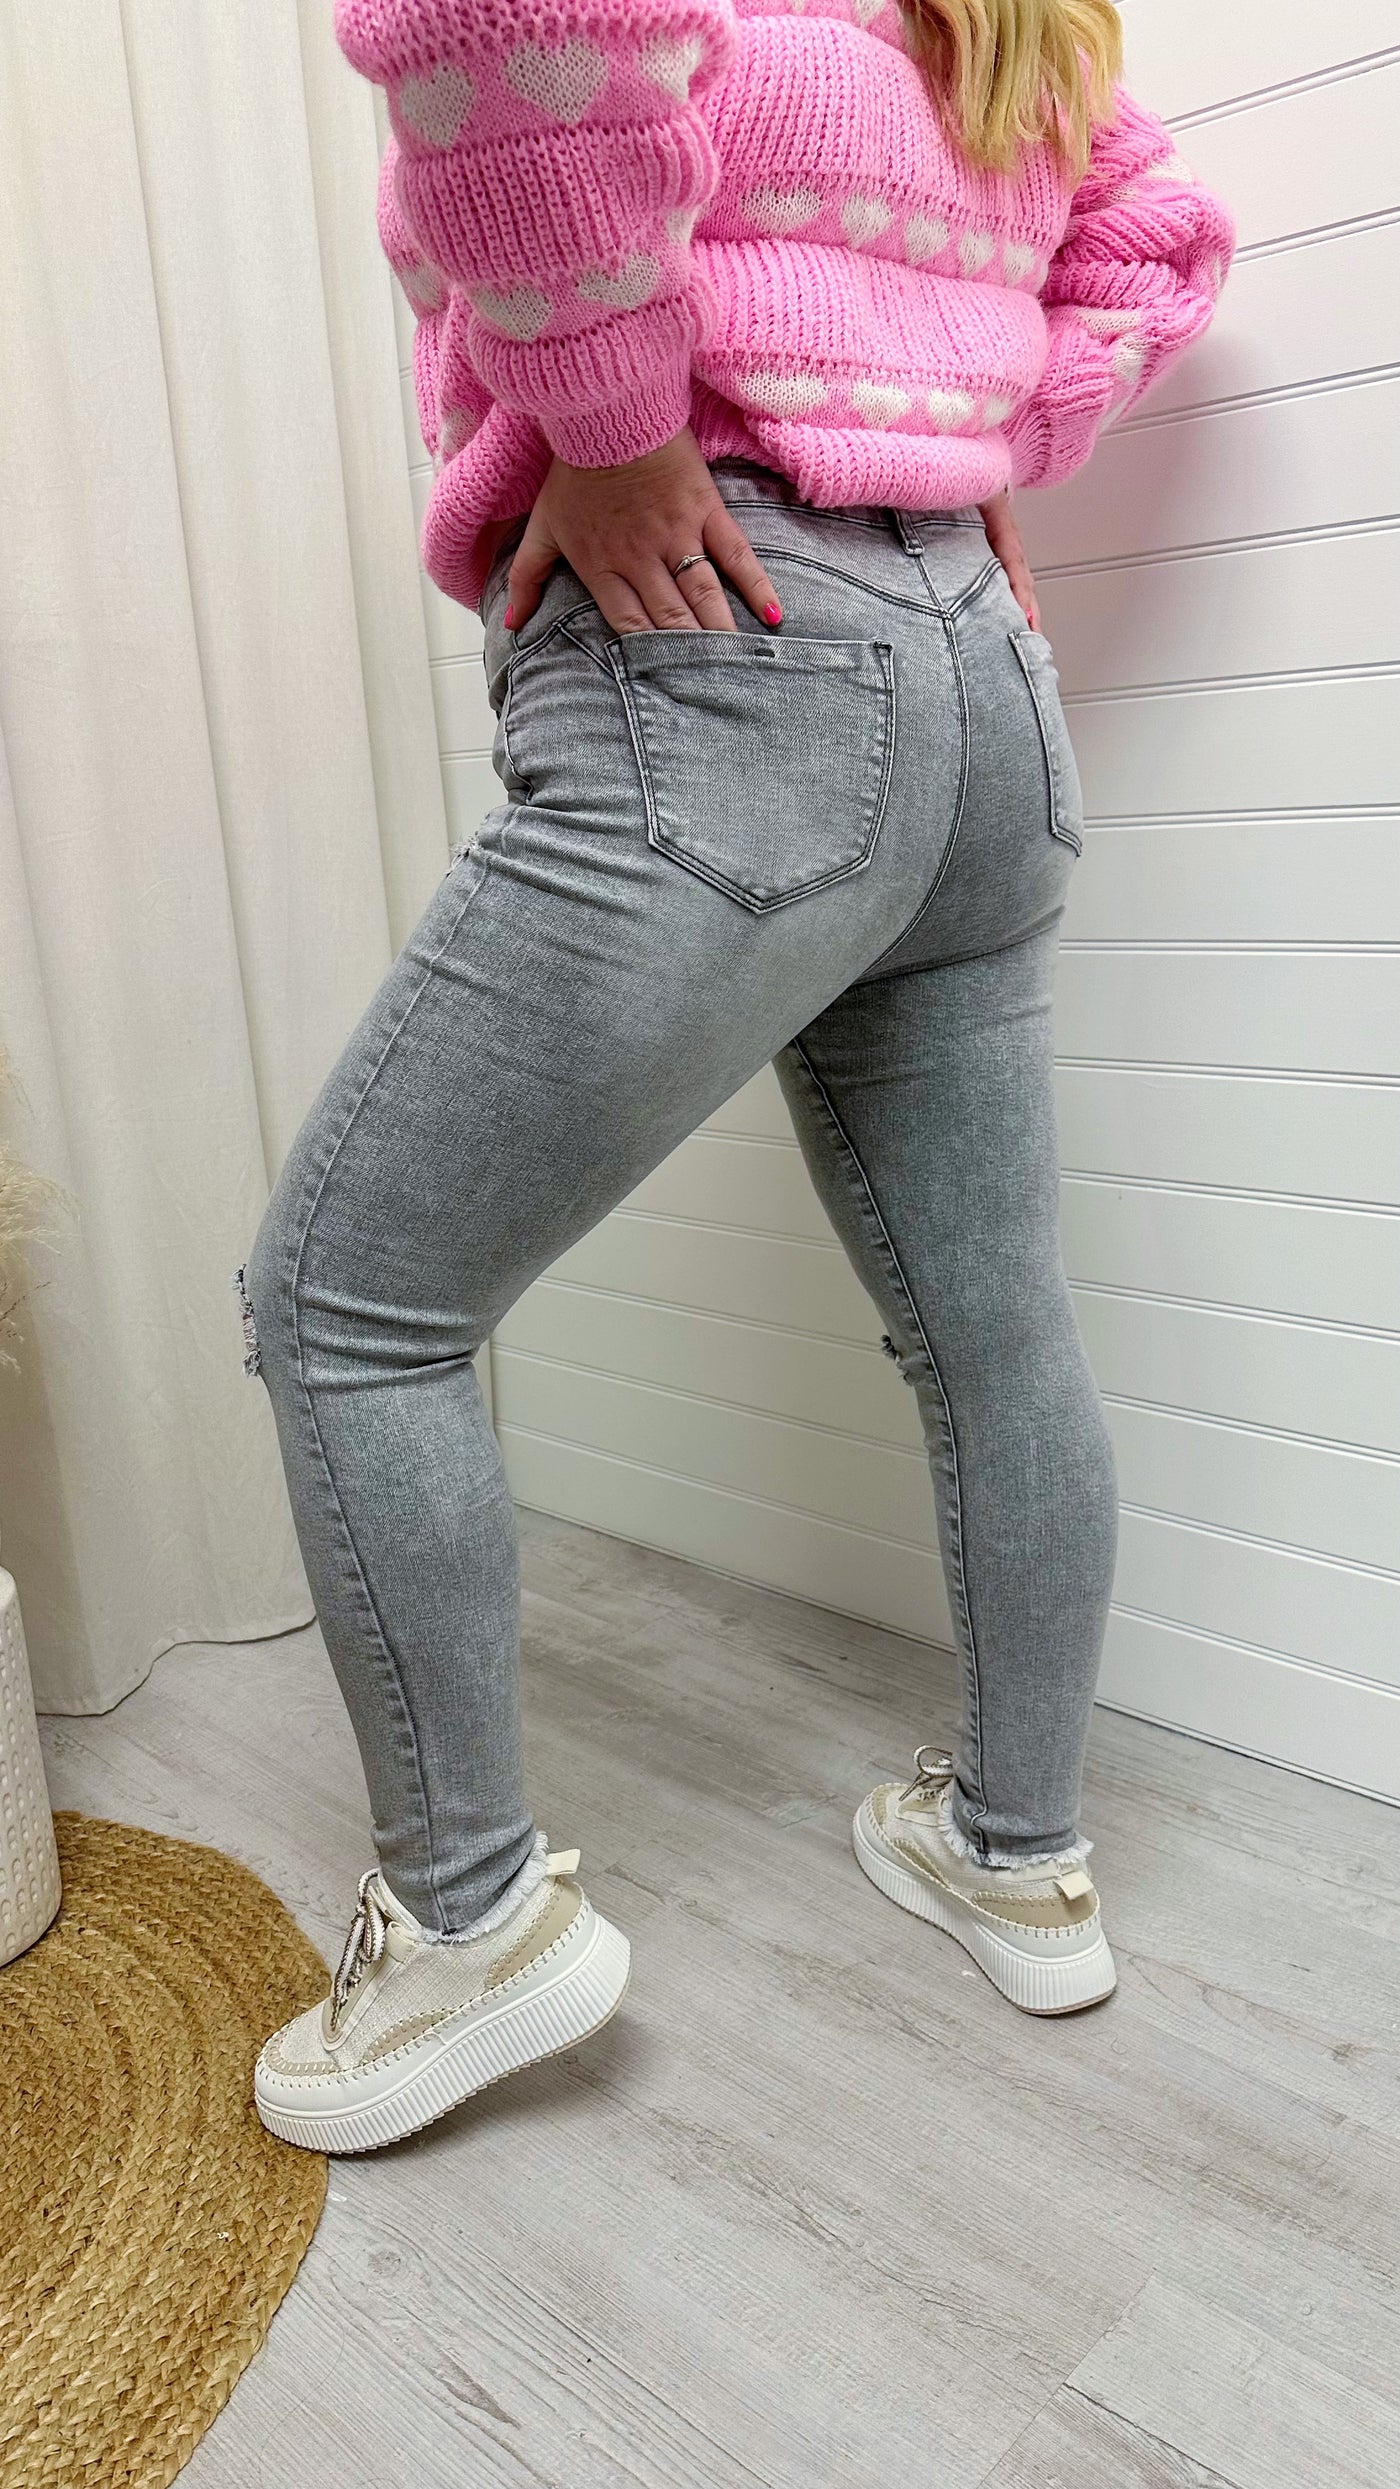 PLUS High Waisted Stretchy Ripped Skinny Jeans - GREY